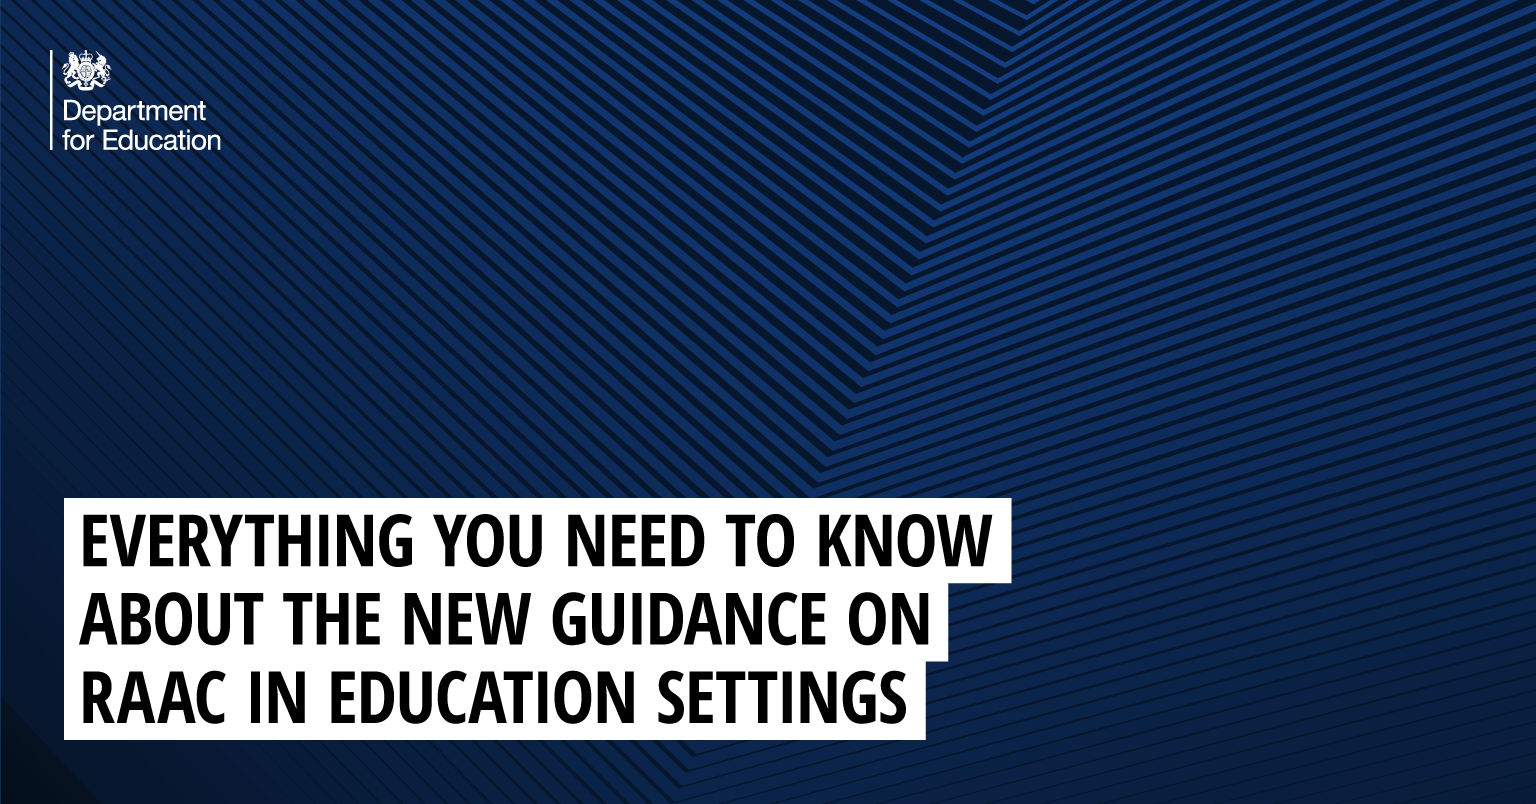 Everything you need to know about the new guidance on RAAC in education settings